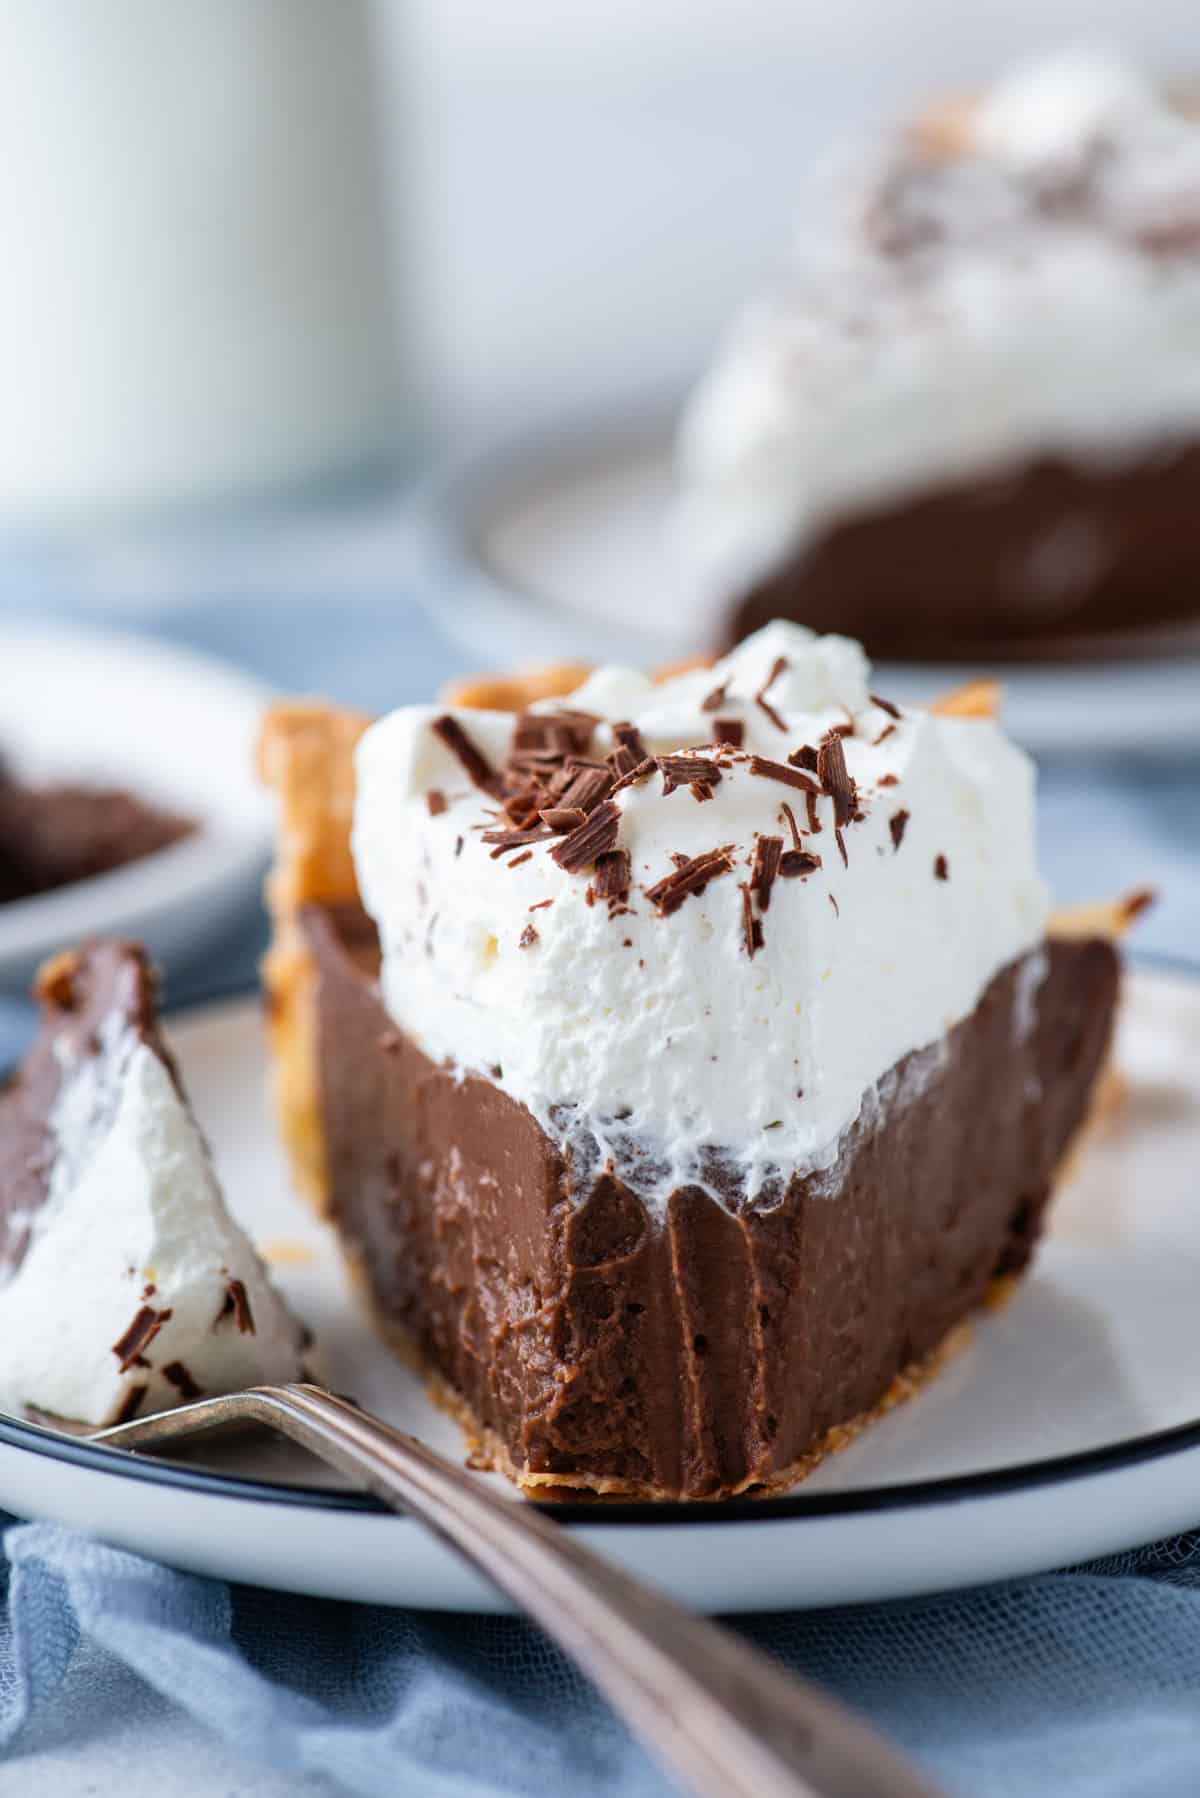 a slice of chocolate pie with a bite taken out which is laying on a fork beside the pie slice on a white plate, sitting on top of a blue towel with more pie slices in the background